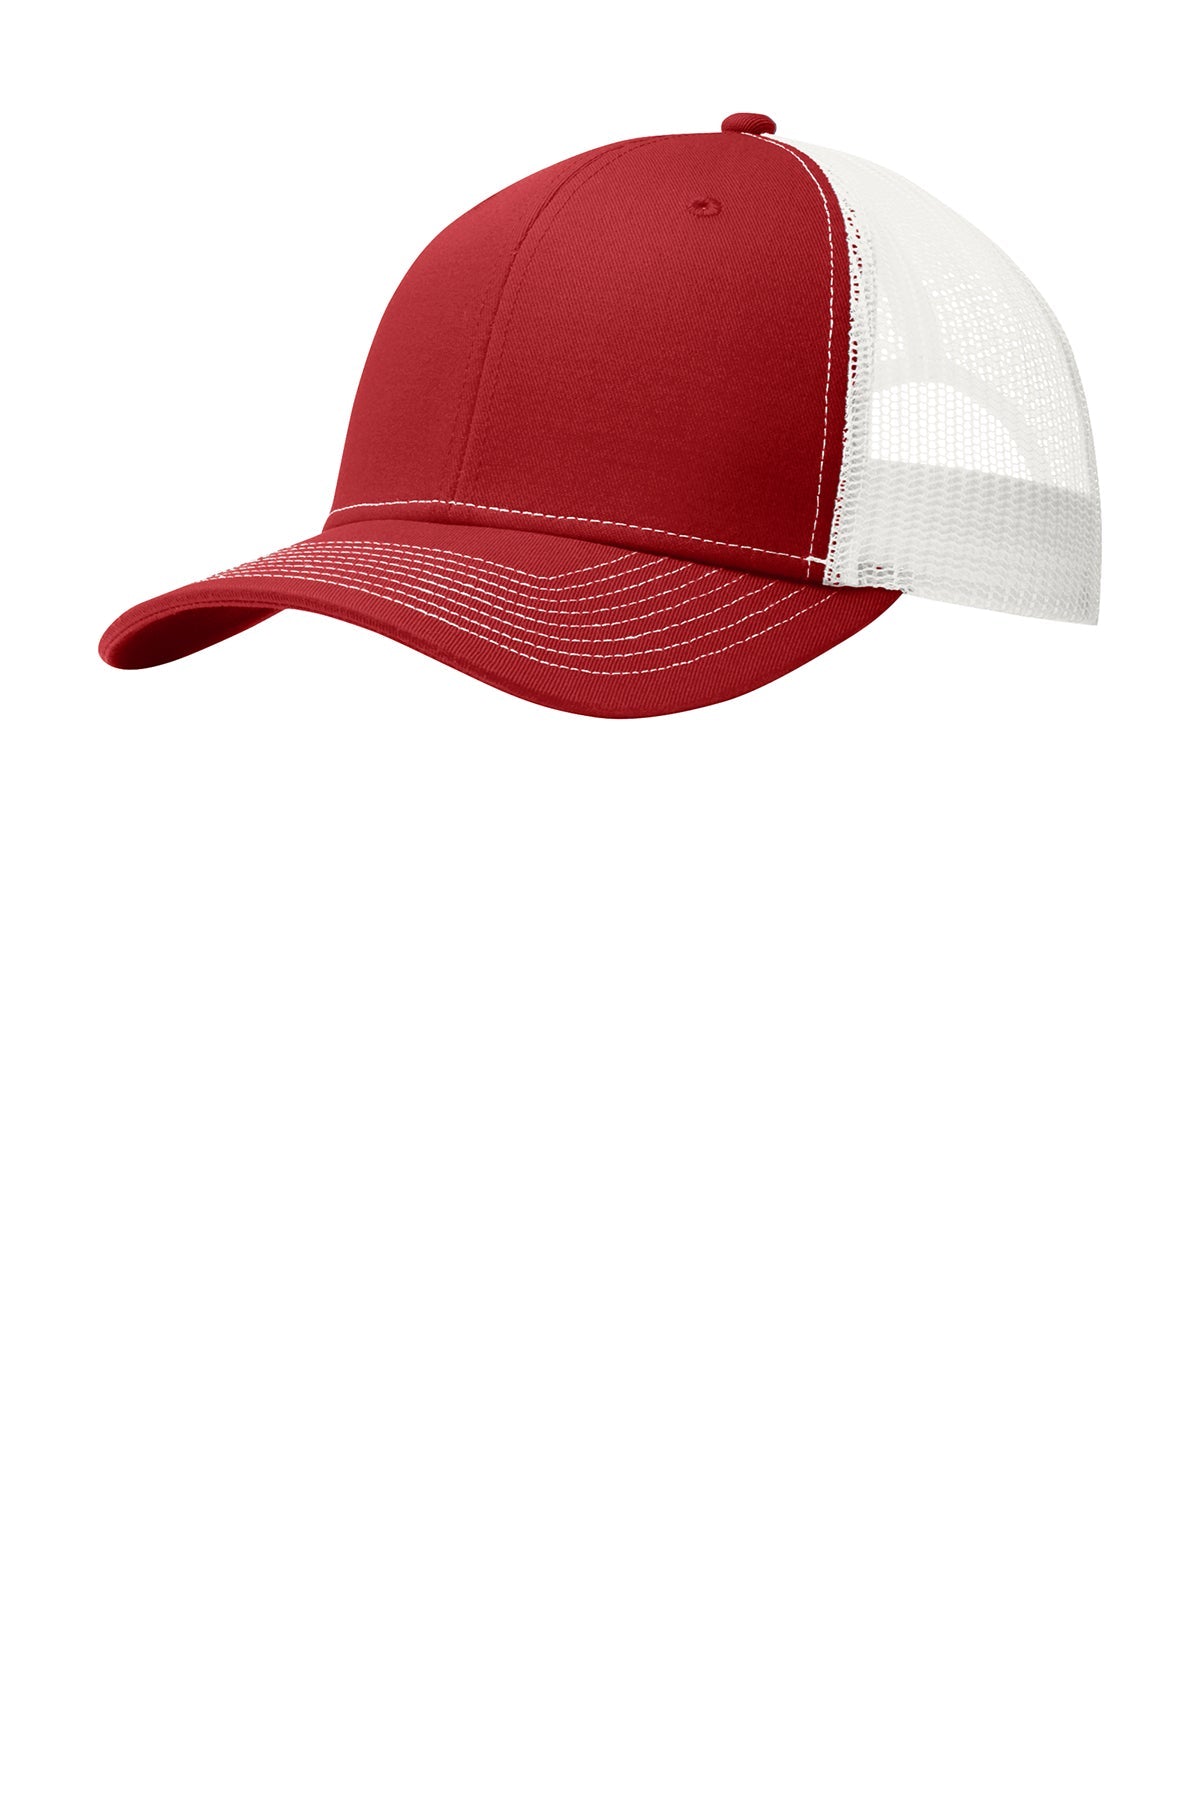 Port Authority Snapback Trucker Branded Caps, Flame Red/ White